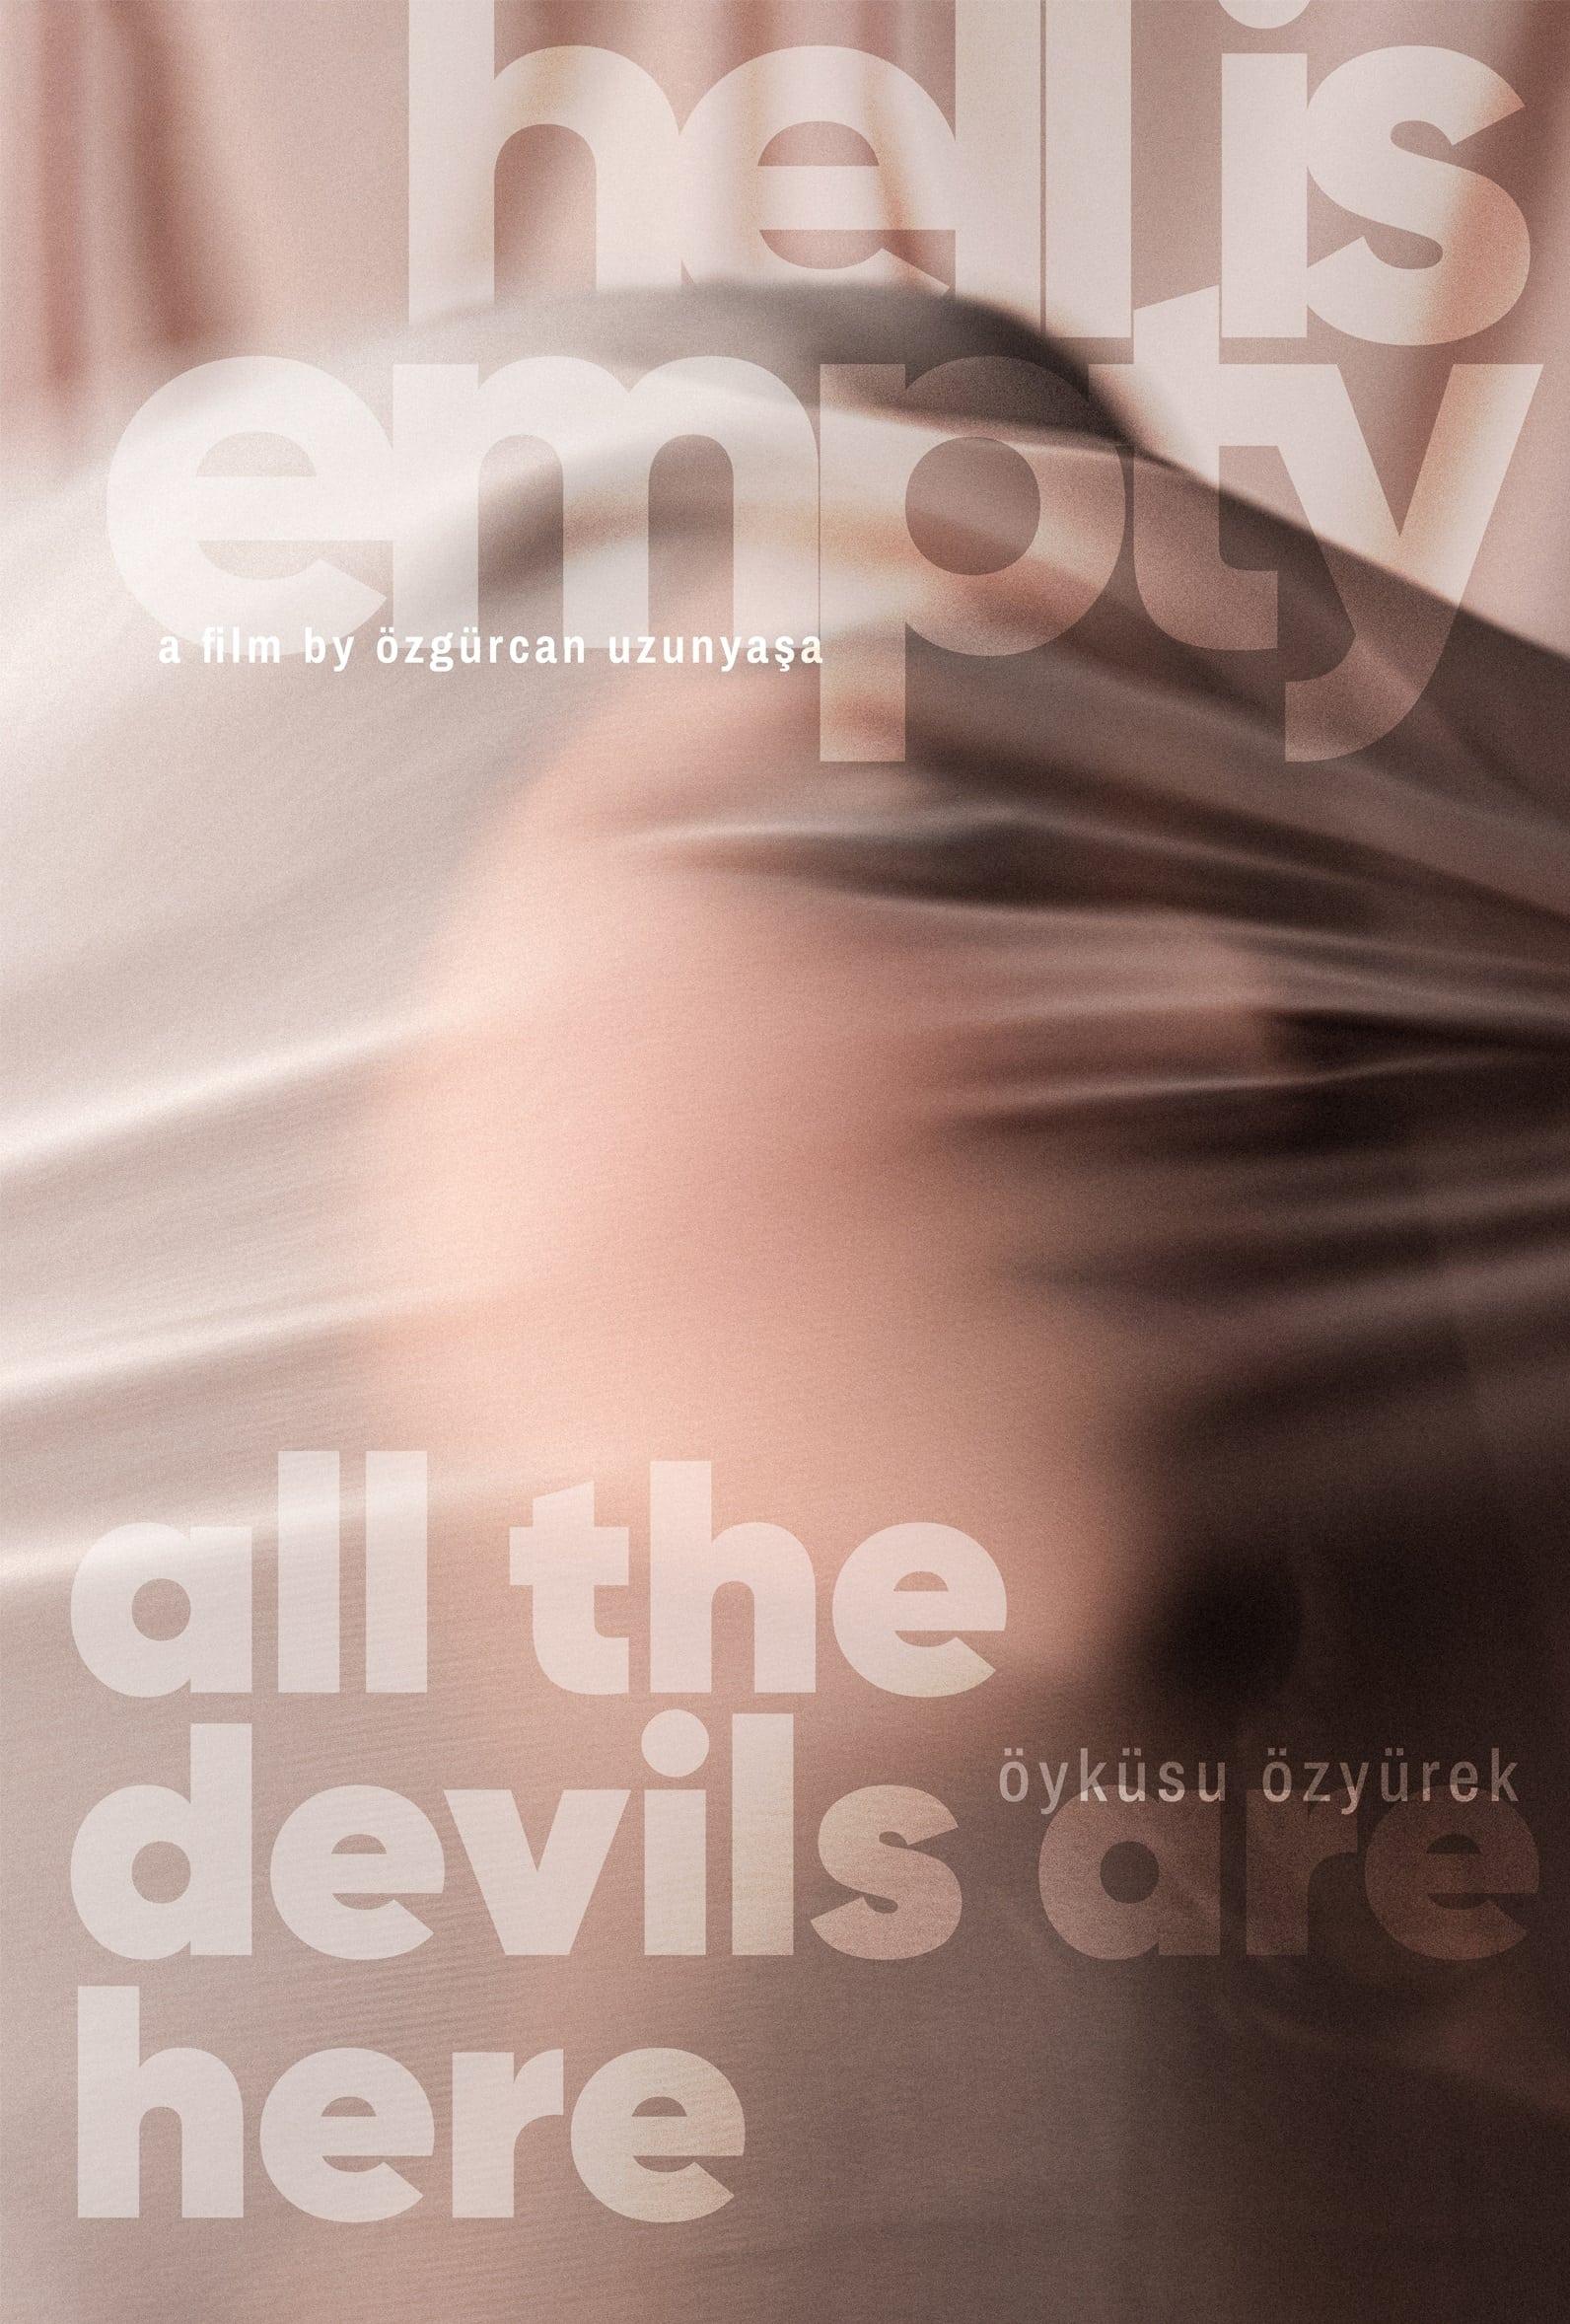 hell is empty, all the devils are here poster